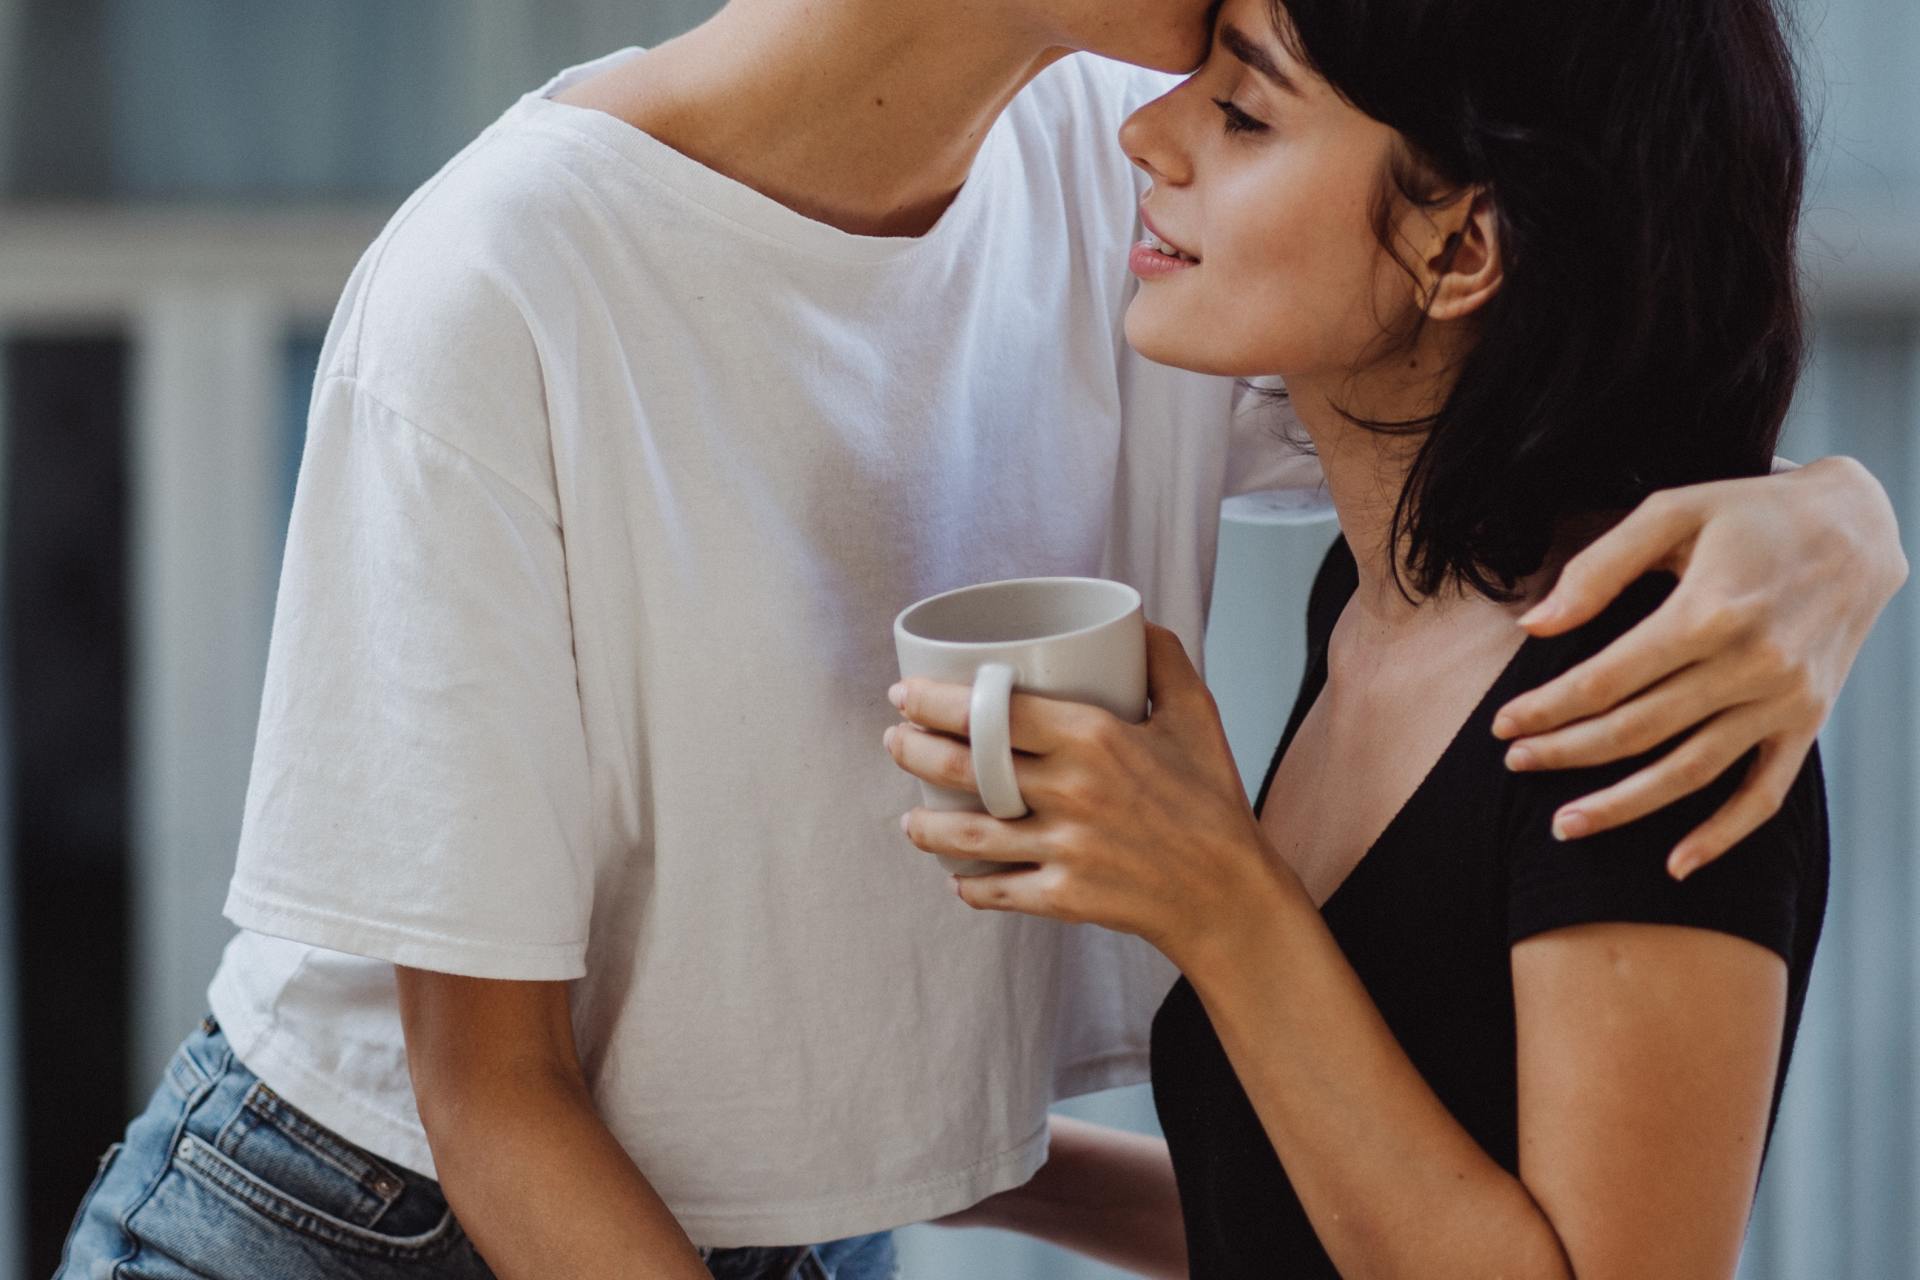 5 Things You Should Know About Living With Your Partner